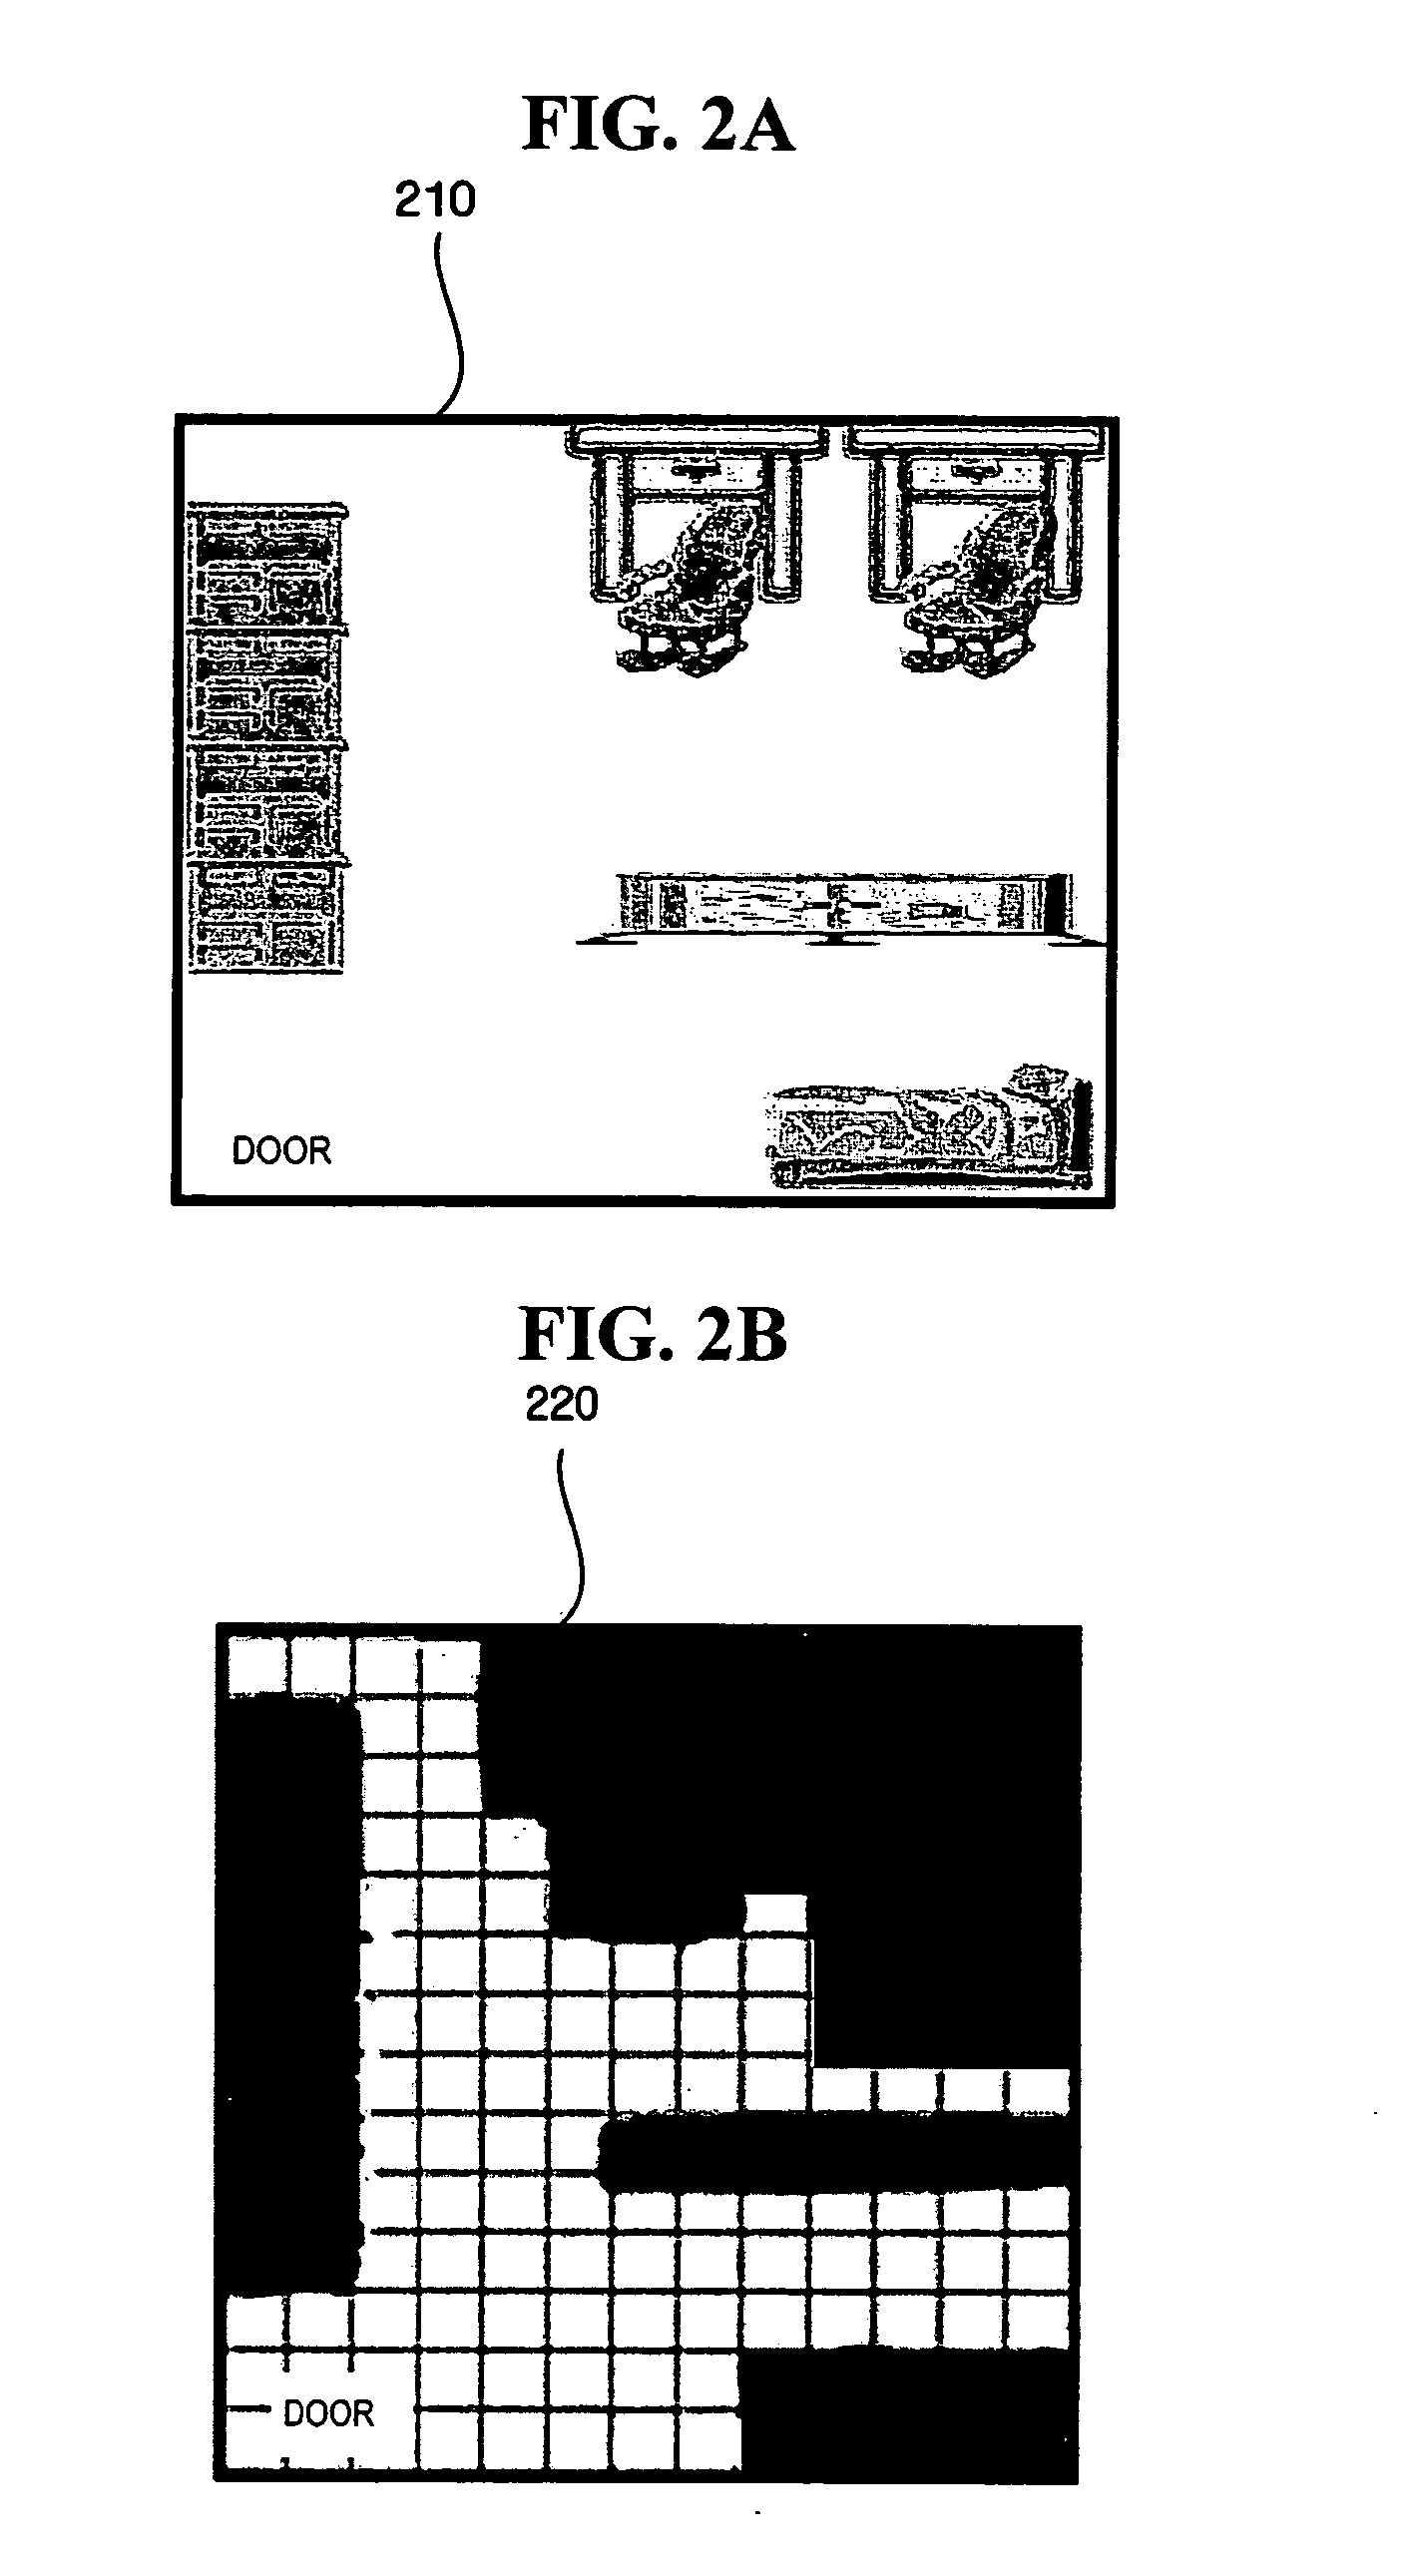 System and method for identifying objects in a space